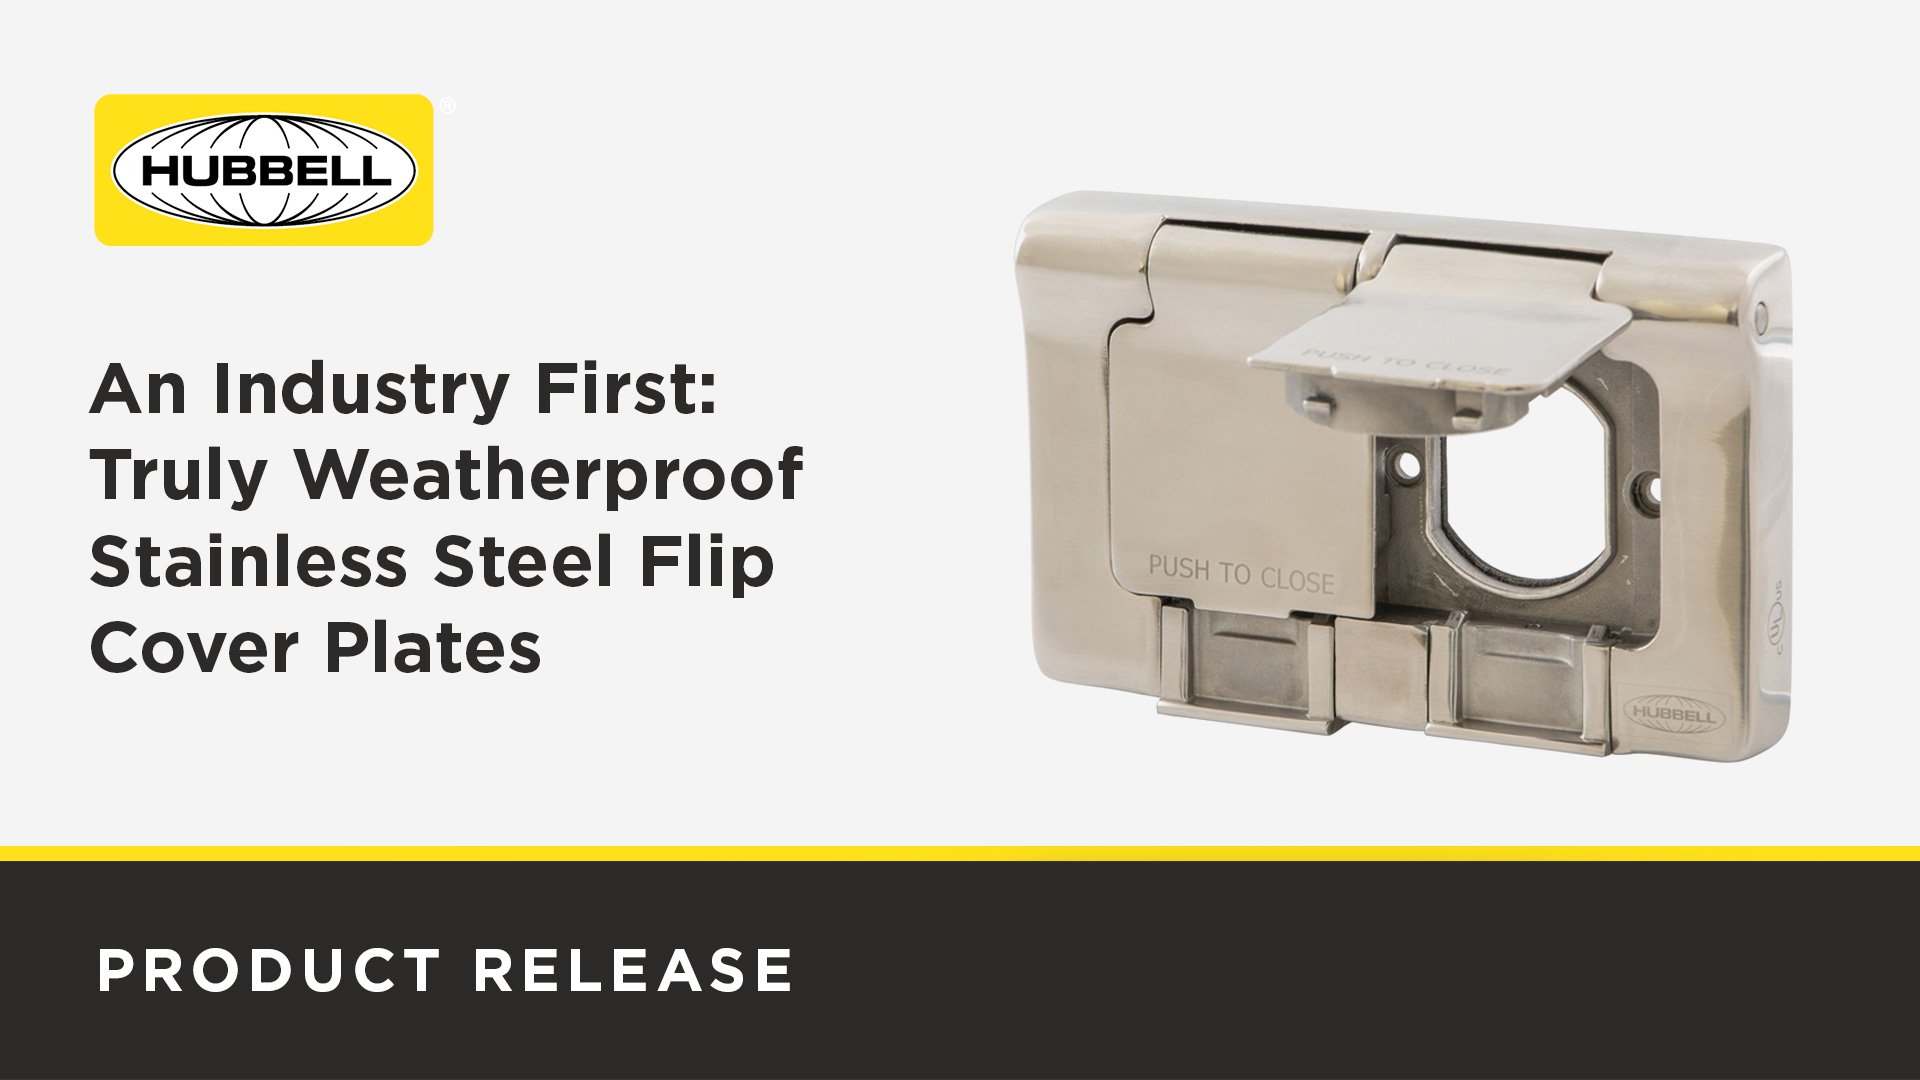 An Industry First: Truly Weatherproof Stainless Steel Flip Cover Plates